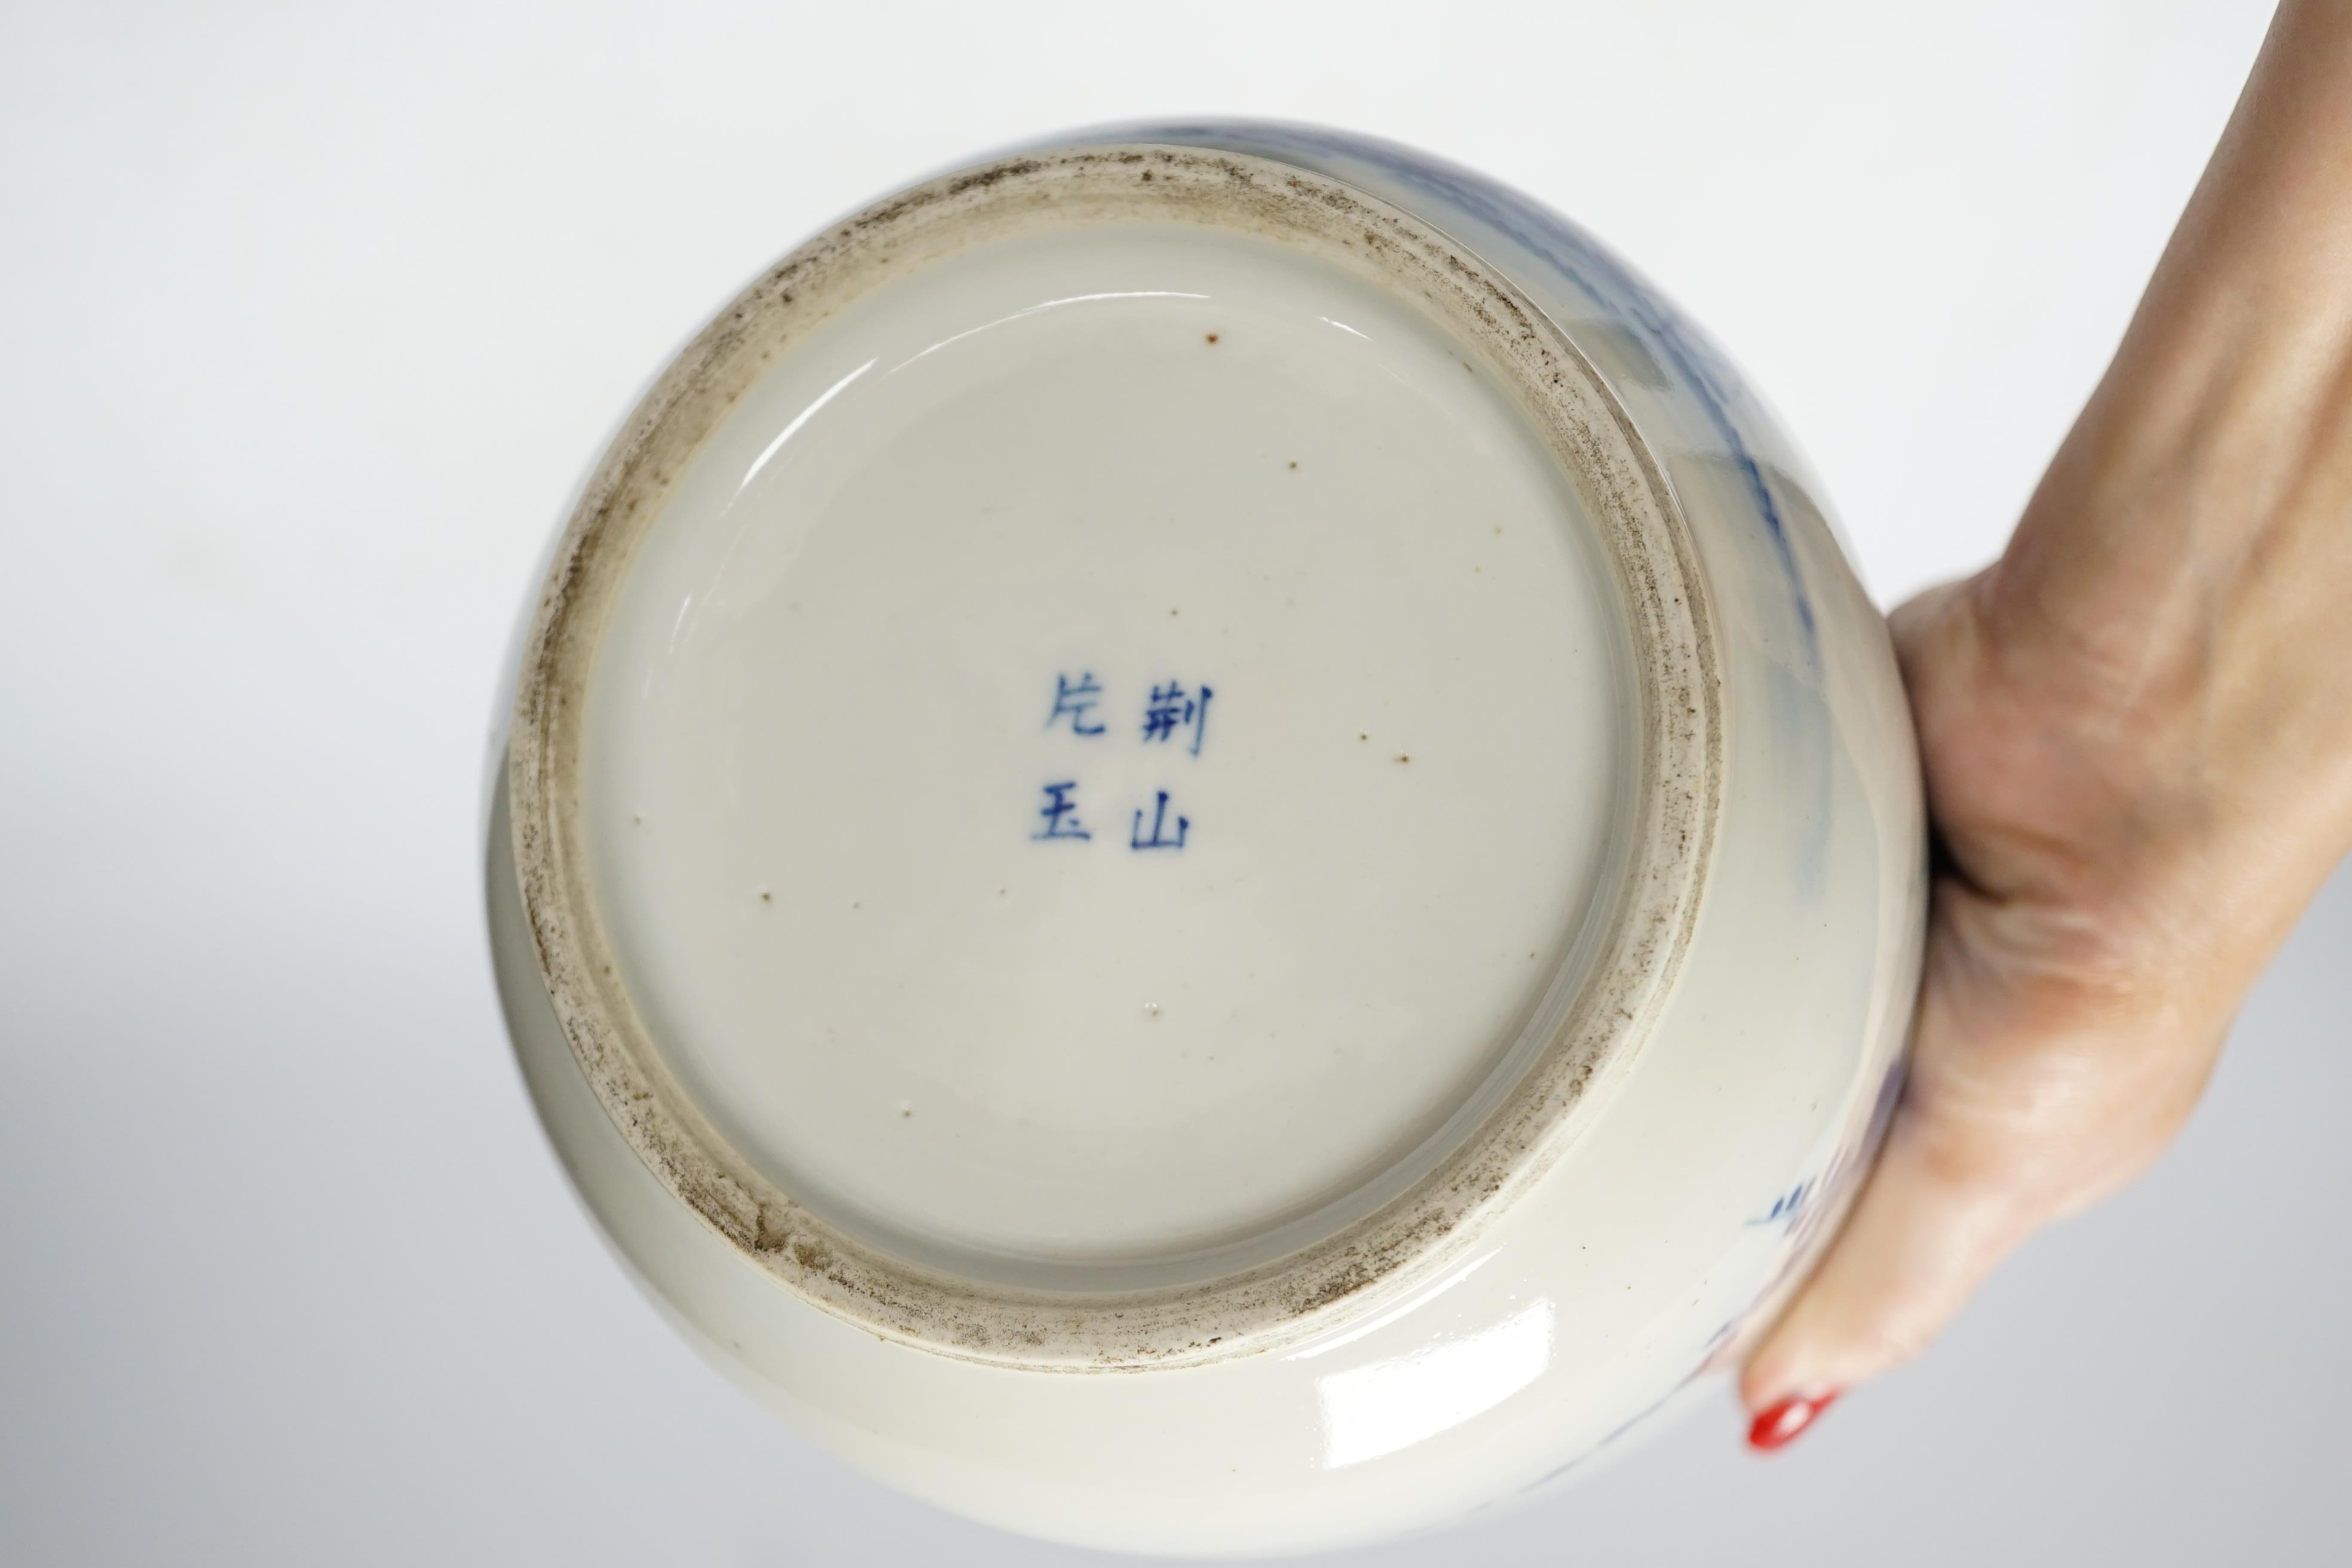 A Chinese porcelain blue and white inscribed jar and cover, 19th century, possibly made for the Vietnamese market, 18cm high